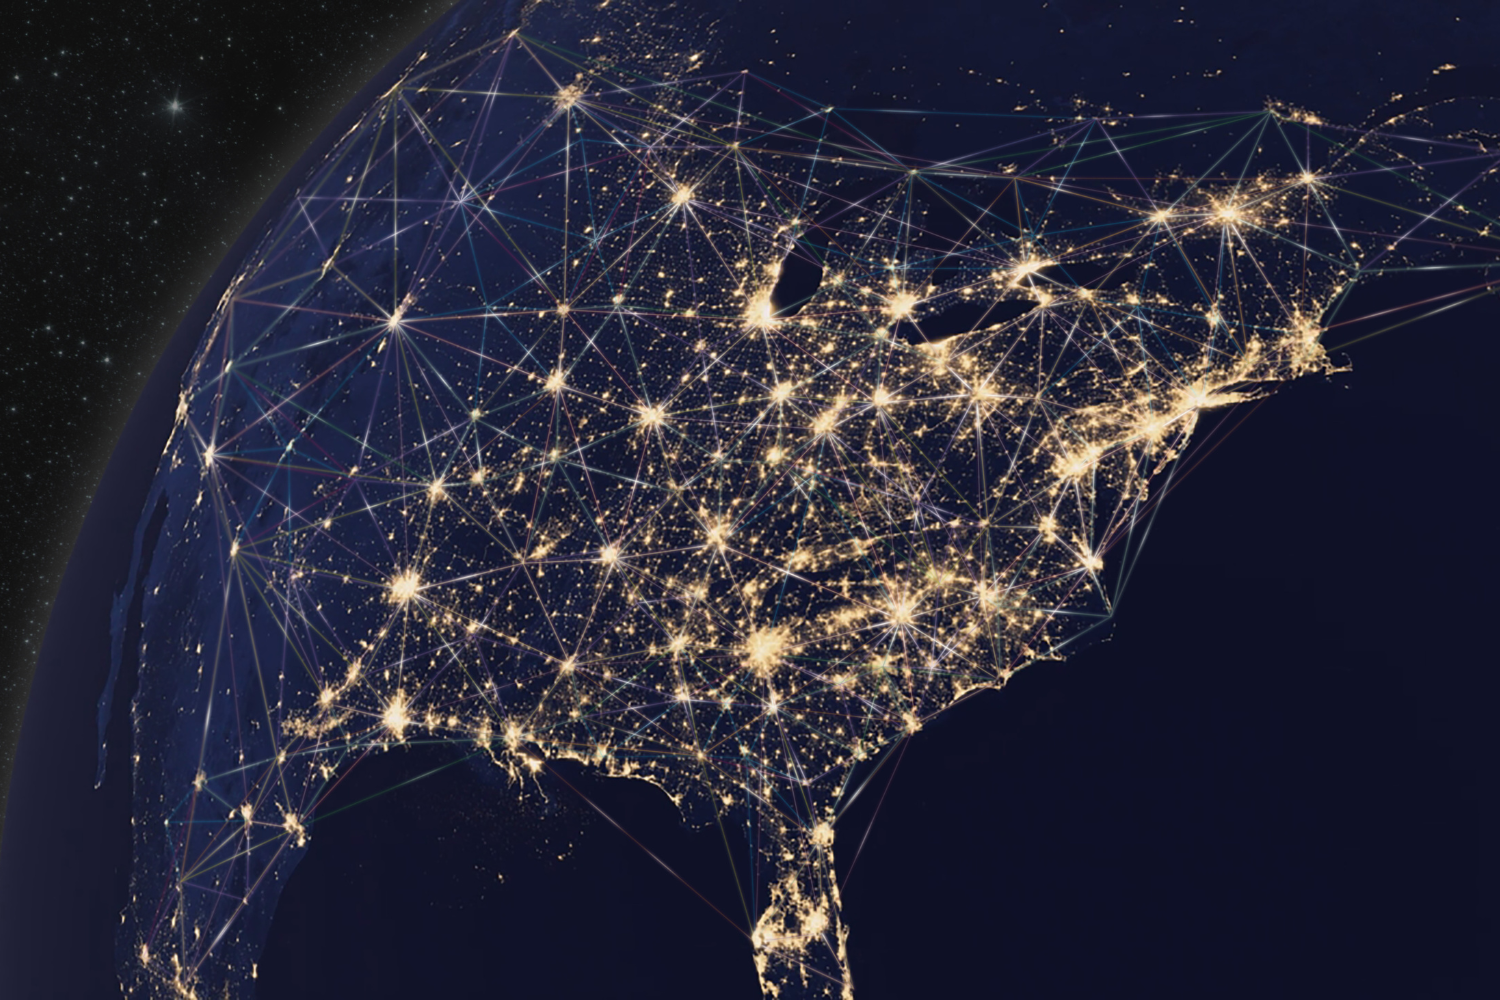 3D illustration of USA (North America) from space with city lights